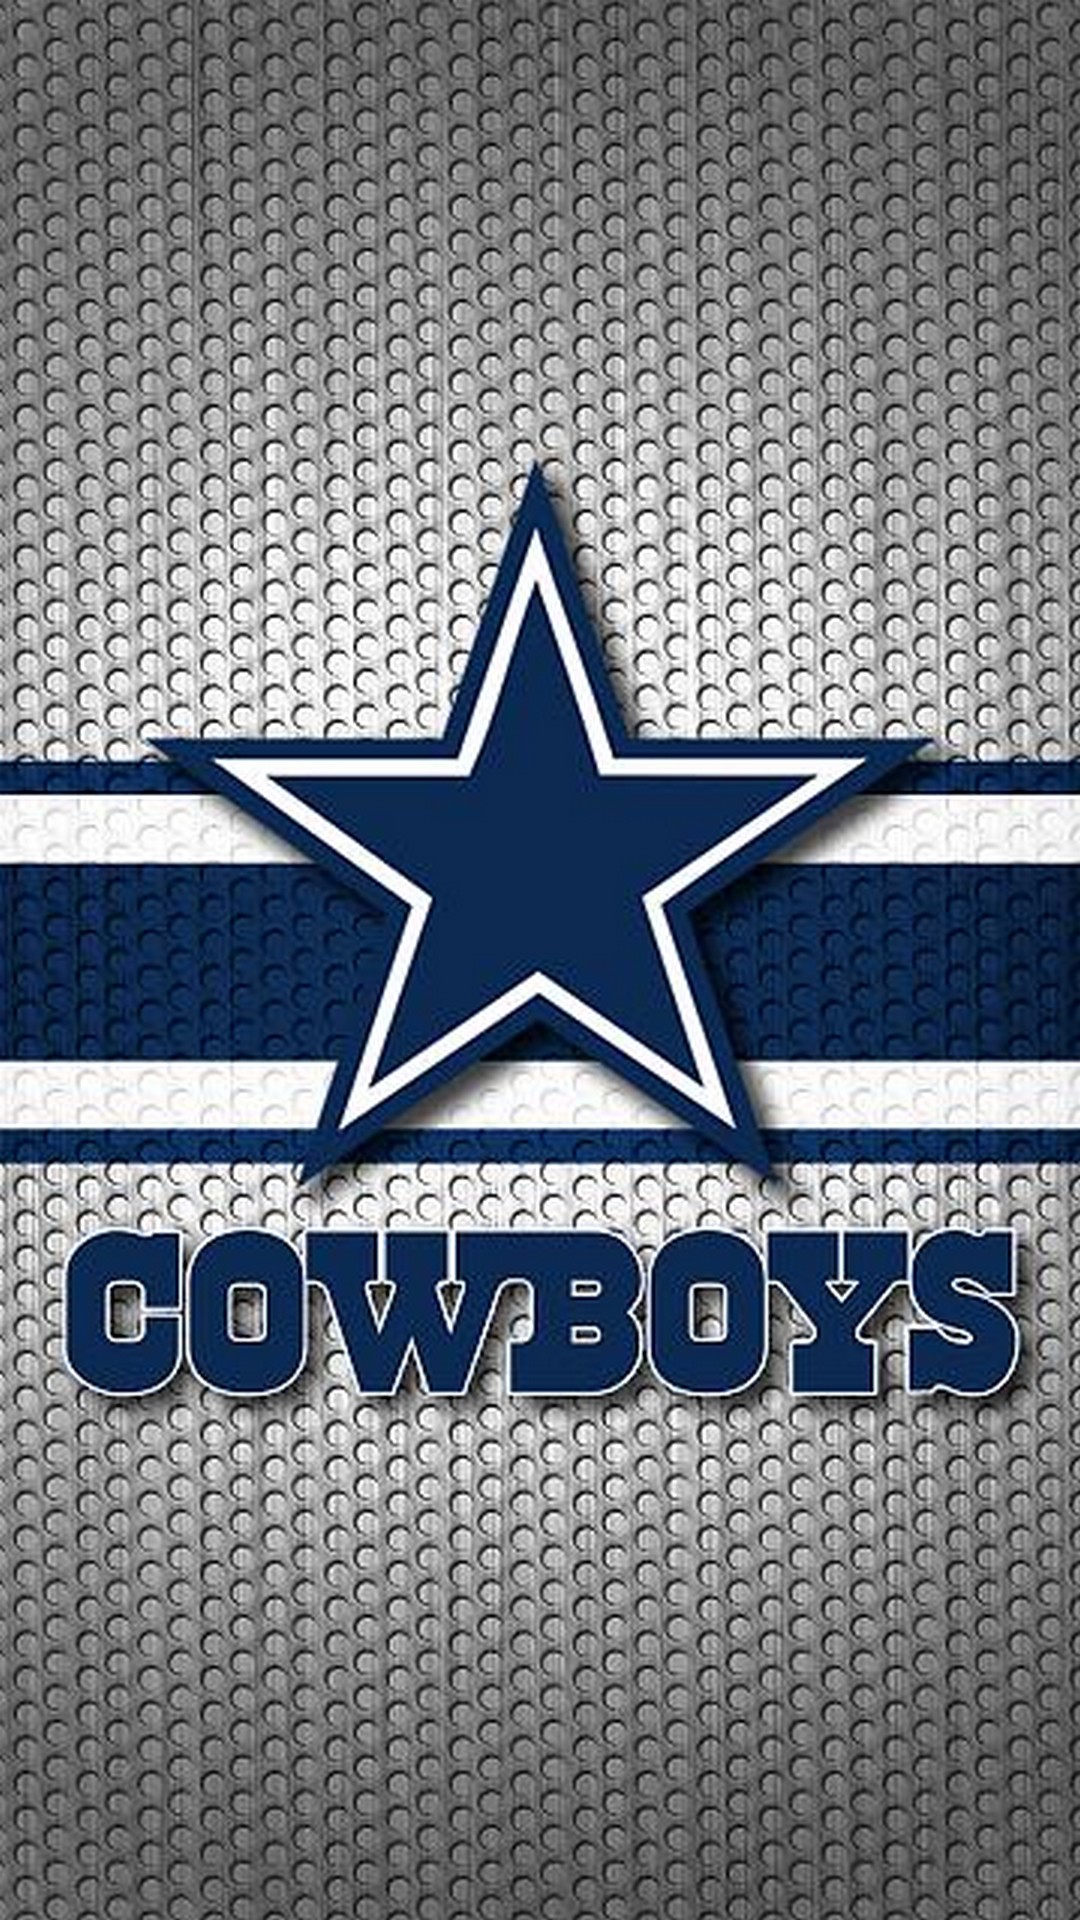 Dallas Cowboys iPhone Backgrounds with high-resolution 1080x1920 pixel. Download and set as wallpaper for Apple iPhone X, XS Max, XR, 8, 7, 6, SE, iPad, Android